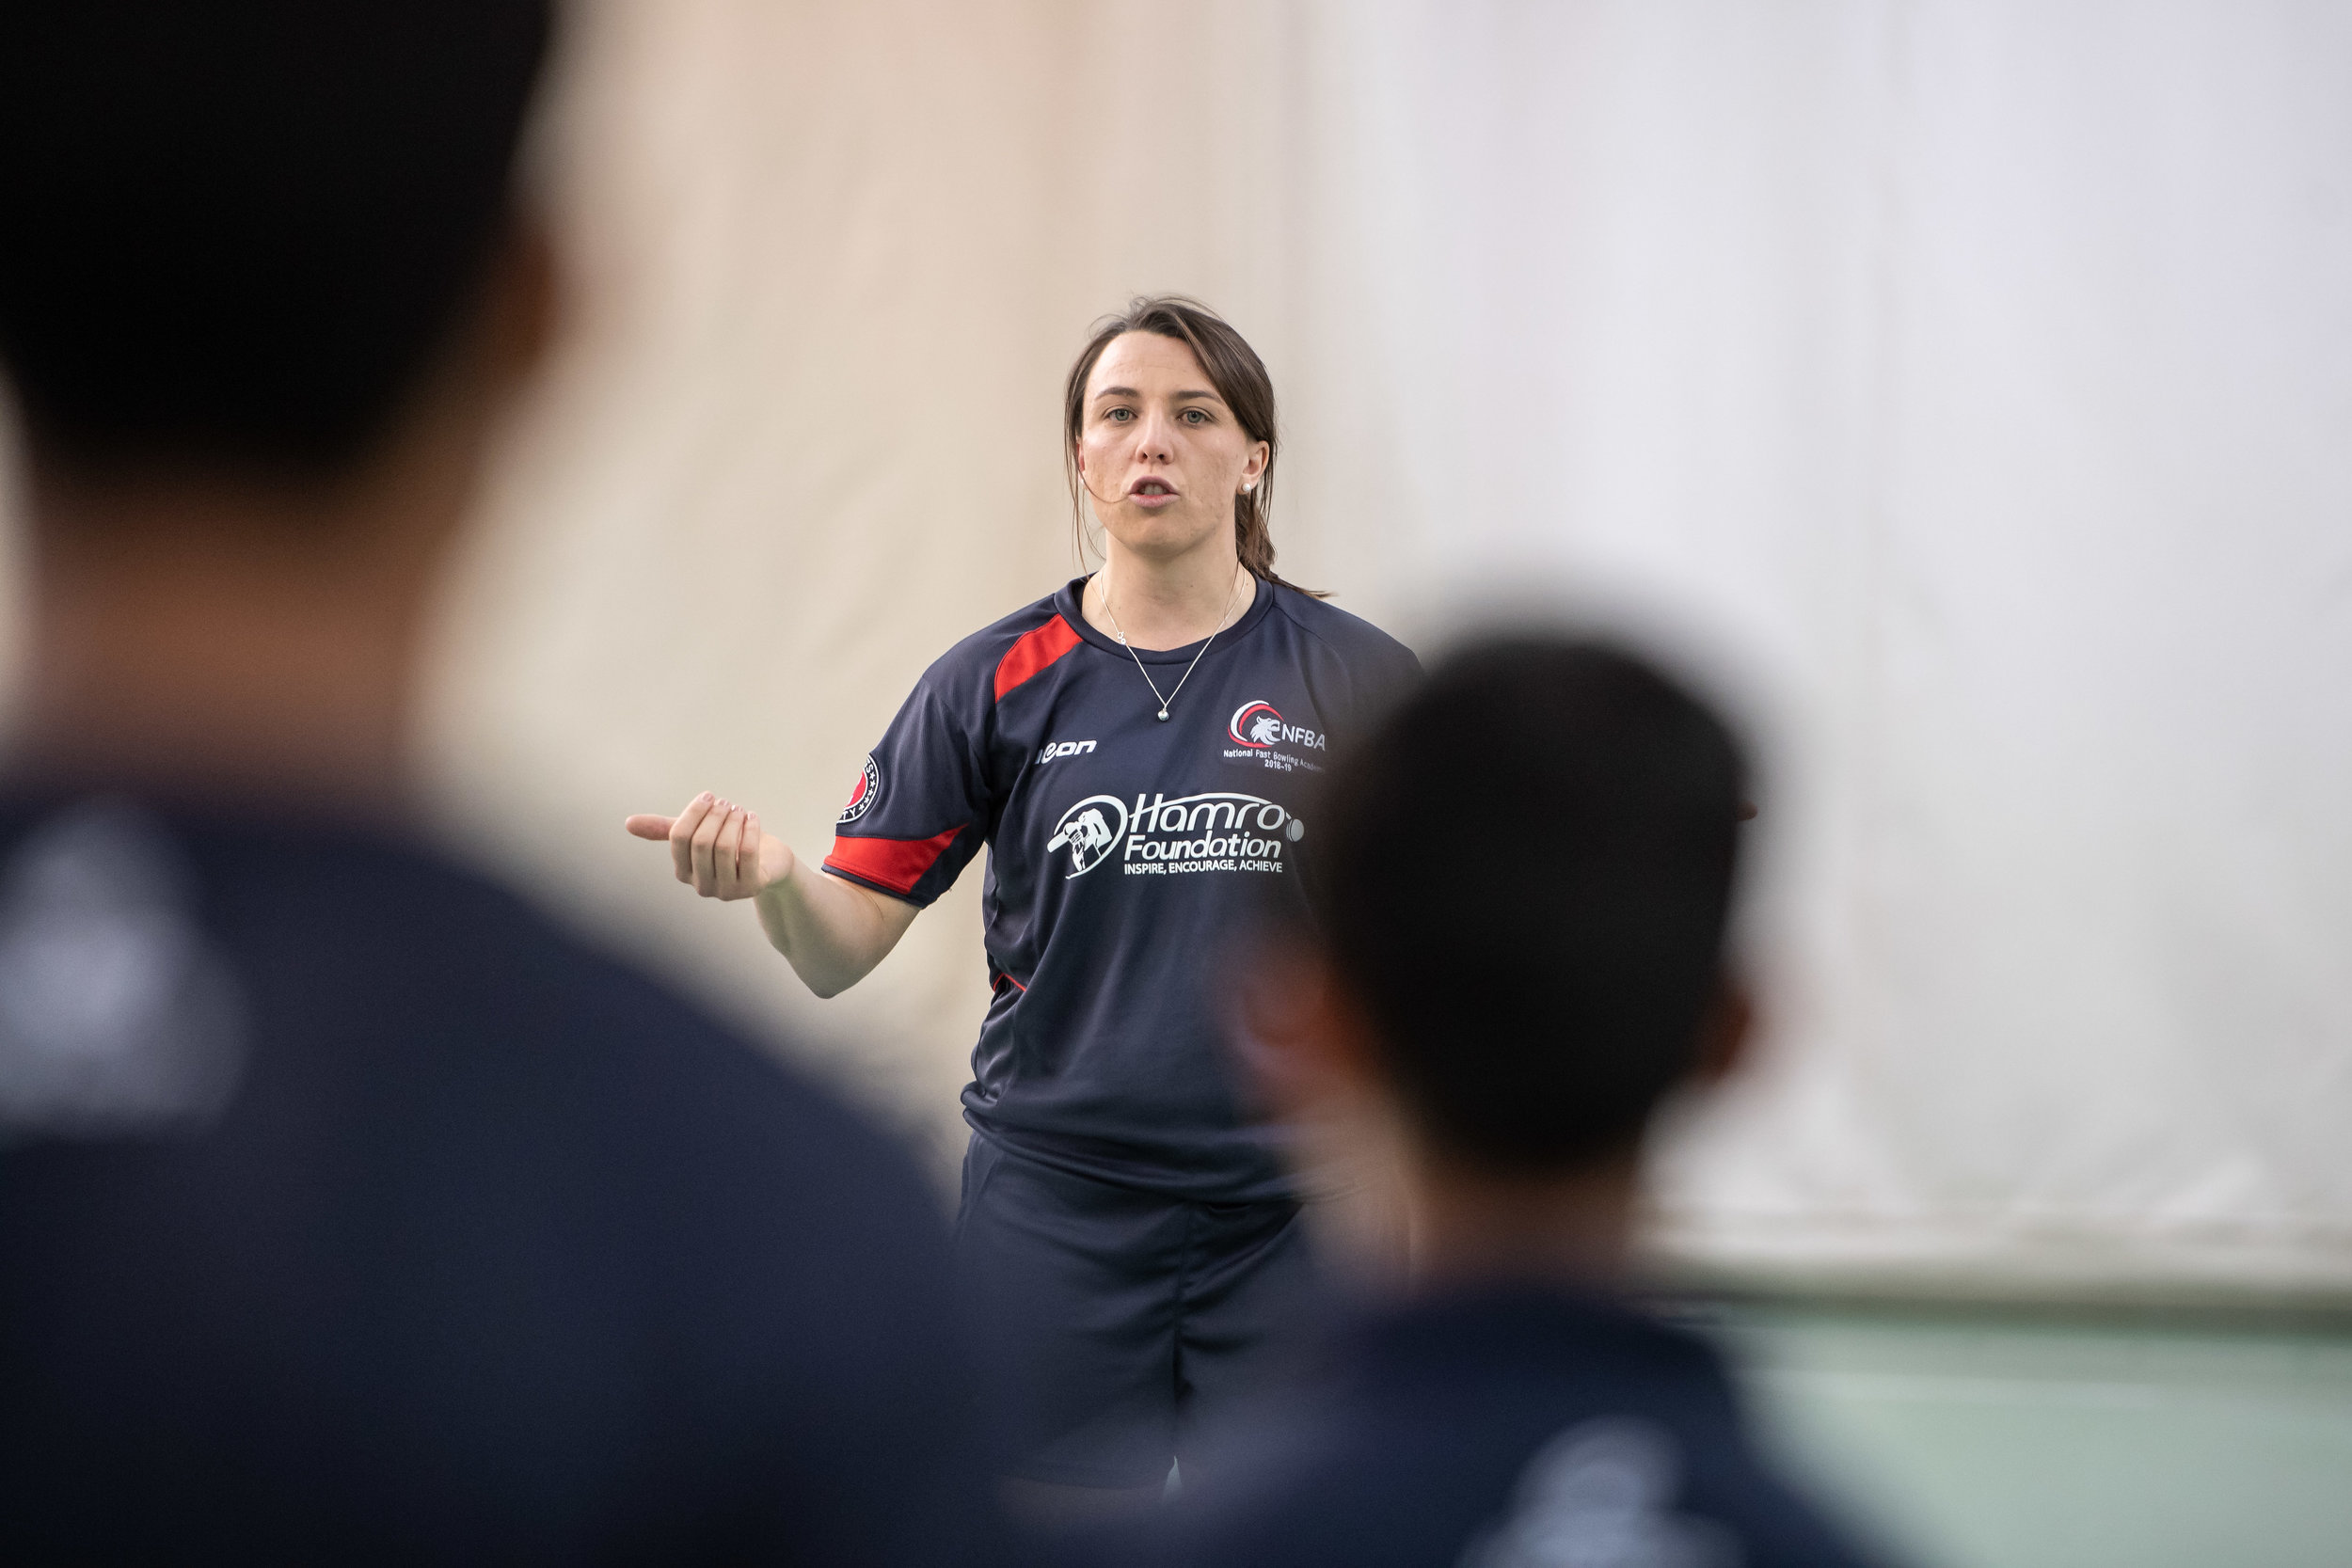 PSI_National_Fast_Bowling_Academy_21OCT18_SW_142.JPG